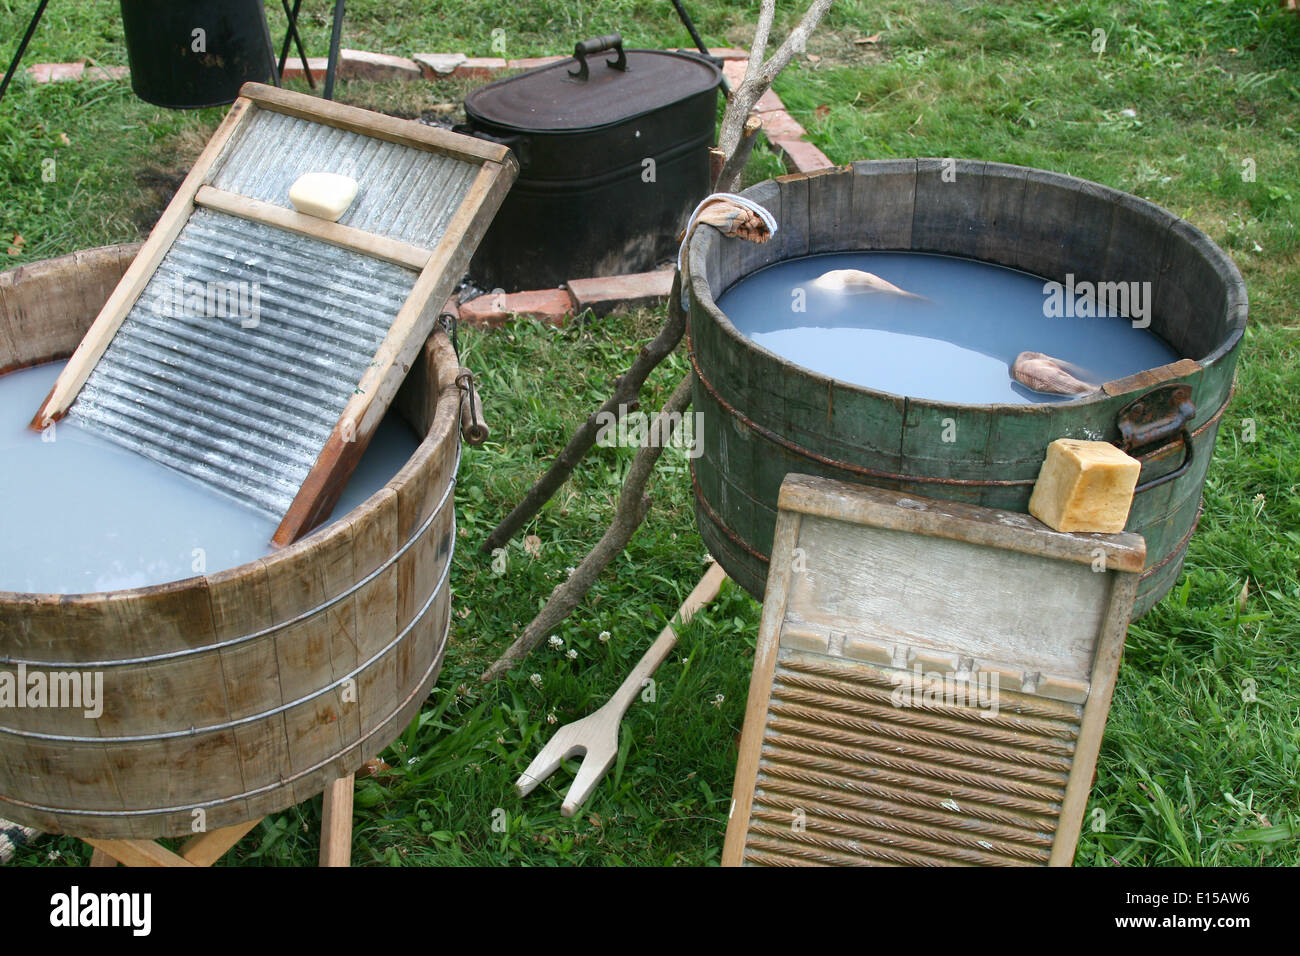 Close Image Old Fashioned Wooden Cloth Pins Laundry Tub Stock Photo by  ©shutterbug68 246596224